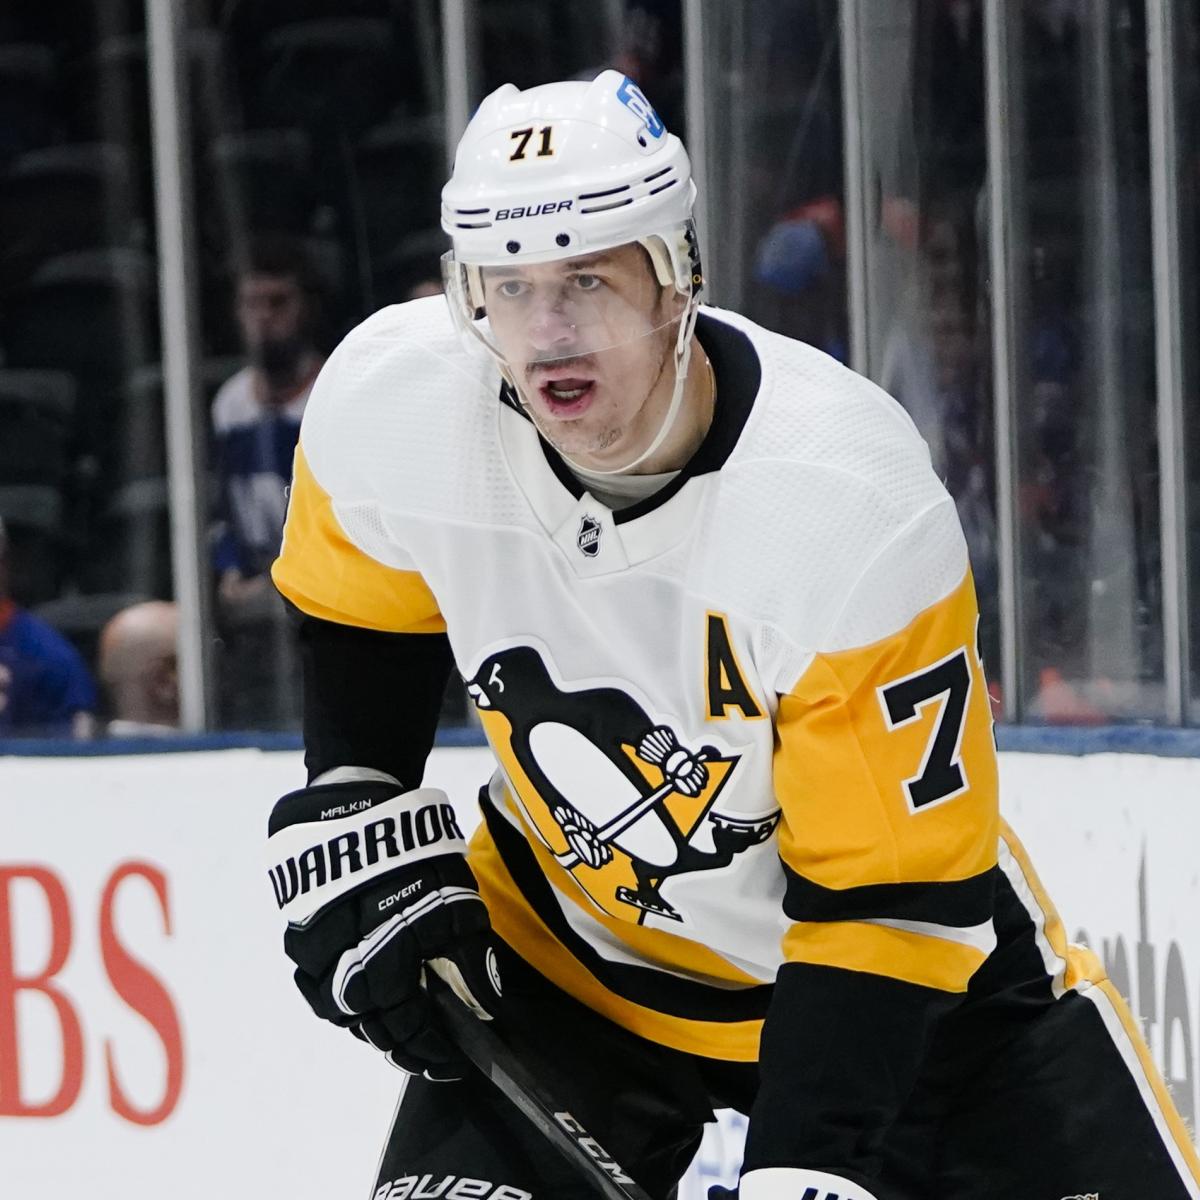 Report: Evgeni Malkin Could Play in KHL If There's an NHL Lockout